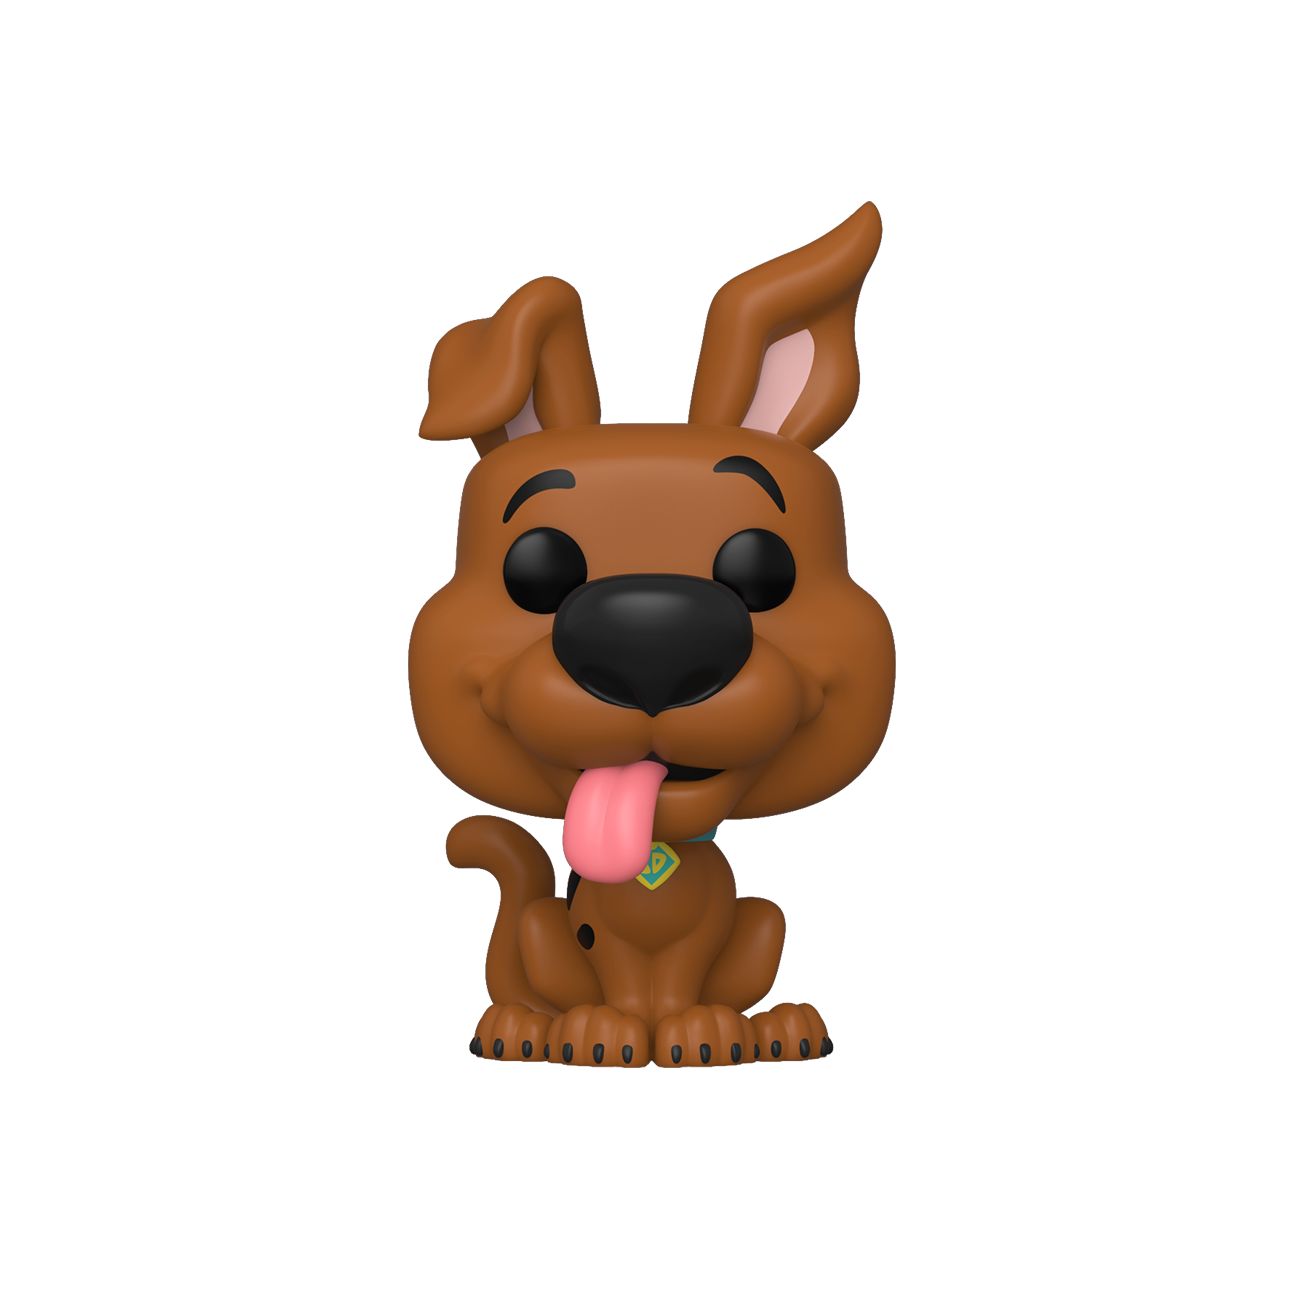 Funko POP! Movies: SCOOB! - Young Scooby - Walmart Exclusive - image 1 of 2